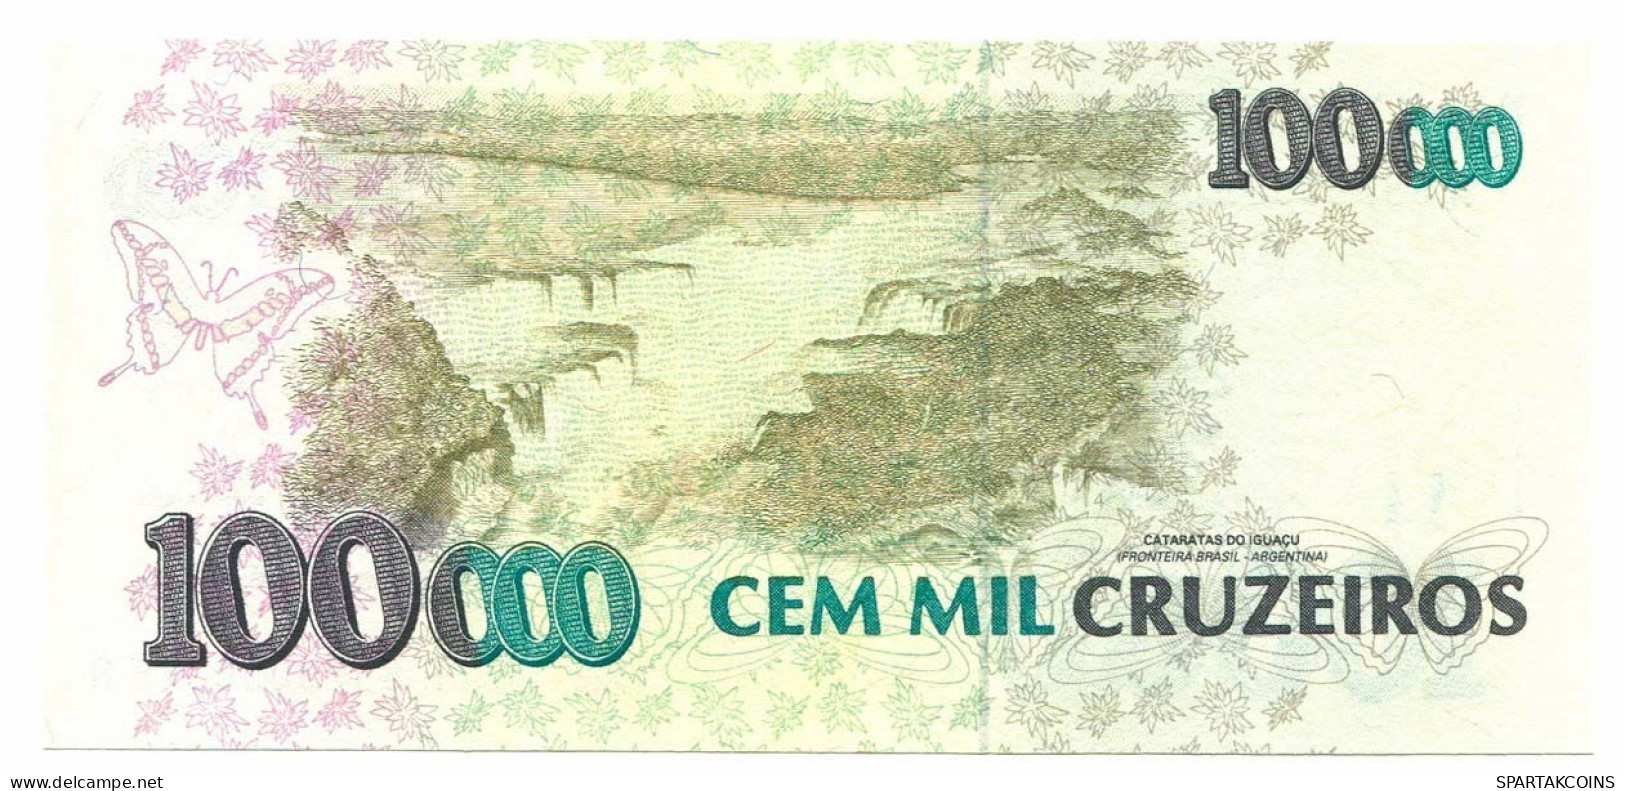 BRASIL 100000 CRUZEIROS 1993 UNC Paper Money Banknote #P10891.4 - [11] Local Banknote Issues